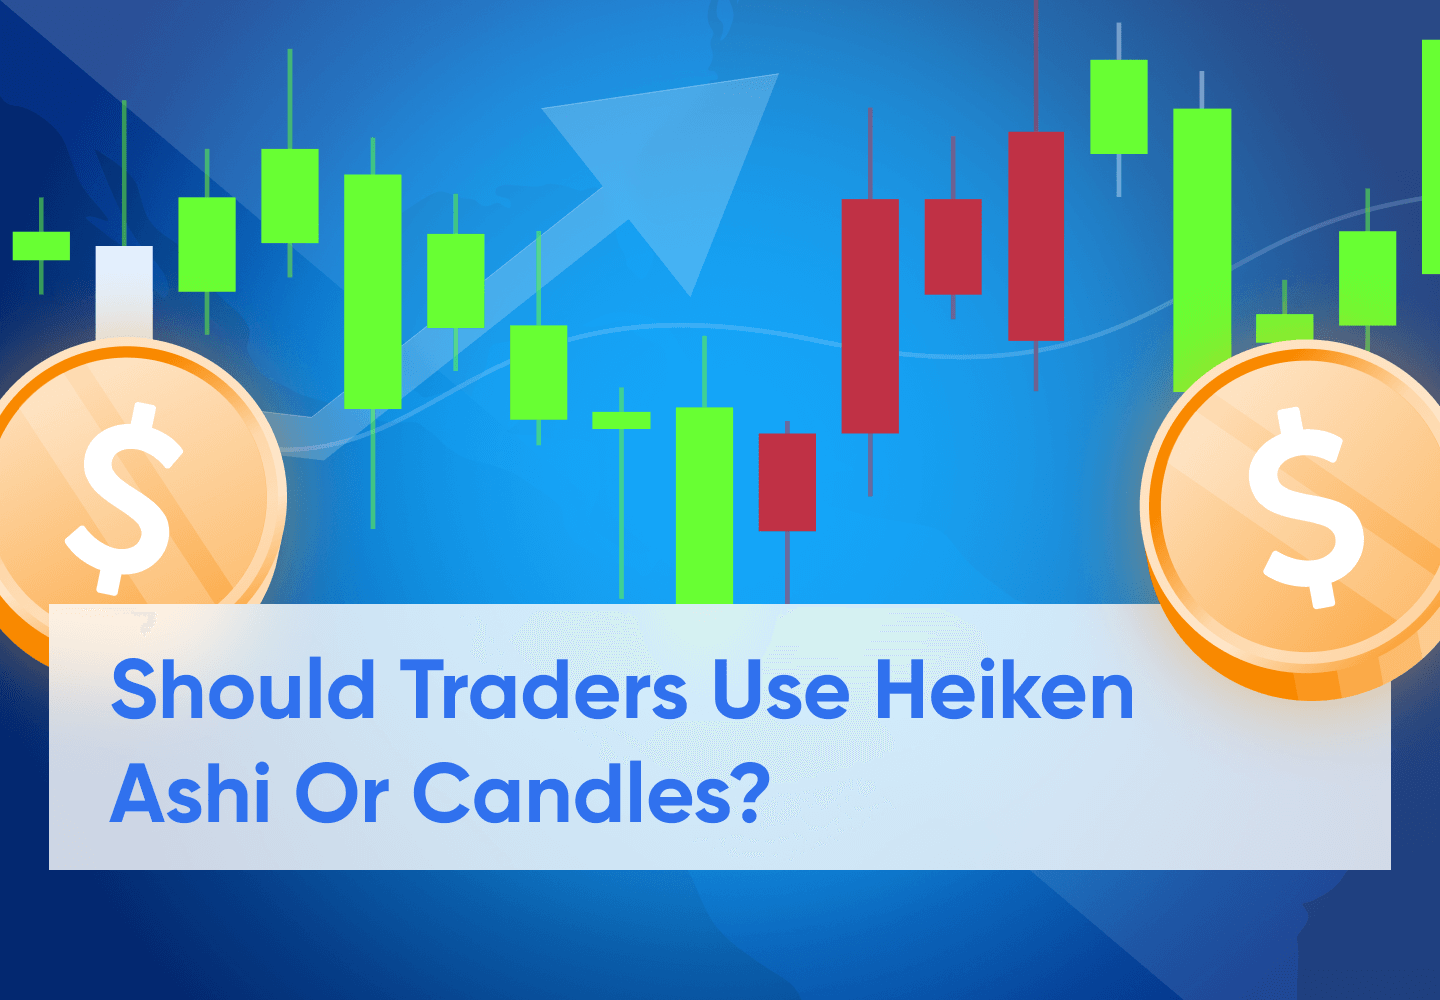 Heikin Ashi candles Vs. Candles, Which Is Better in Identifying Trends